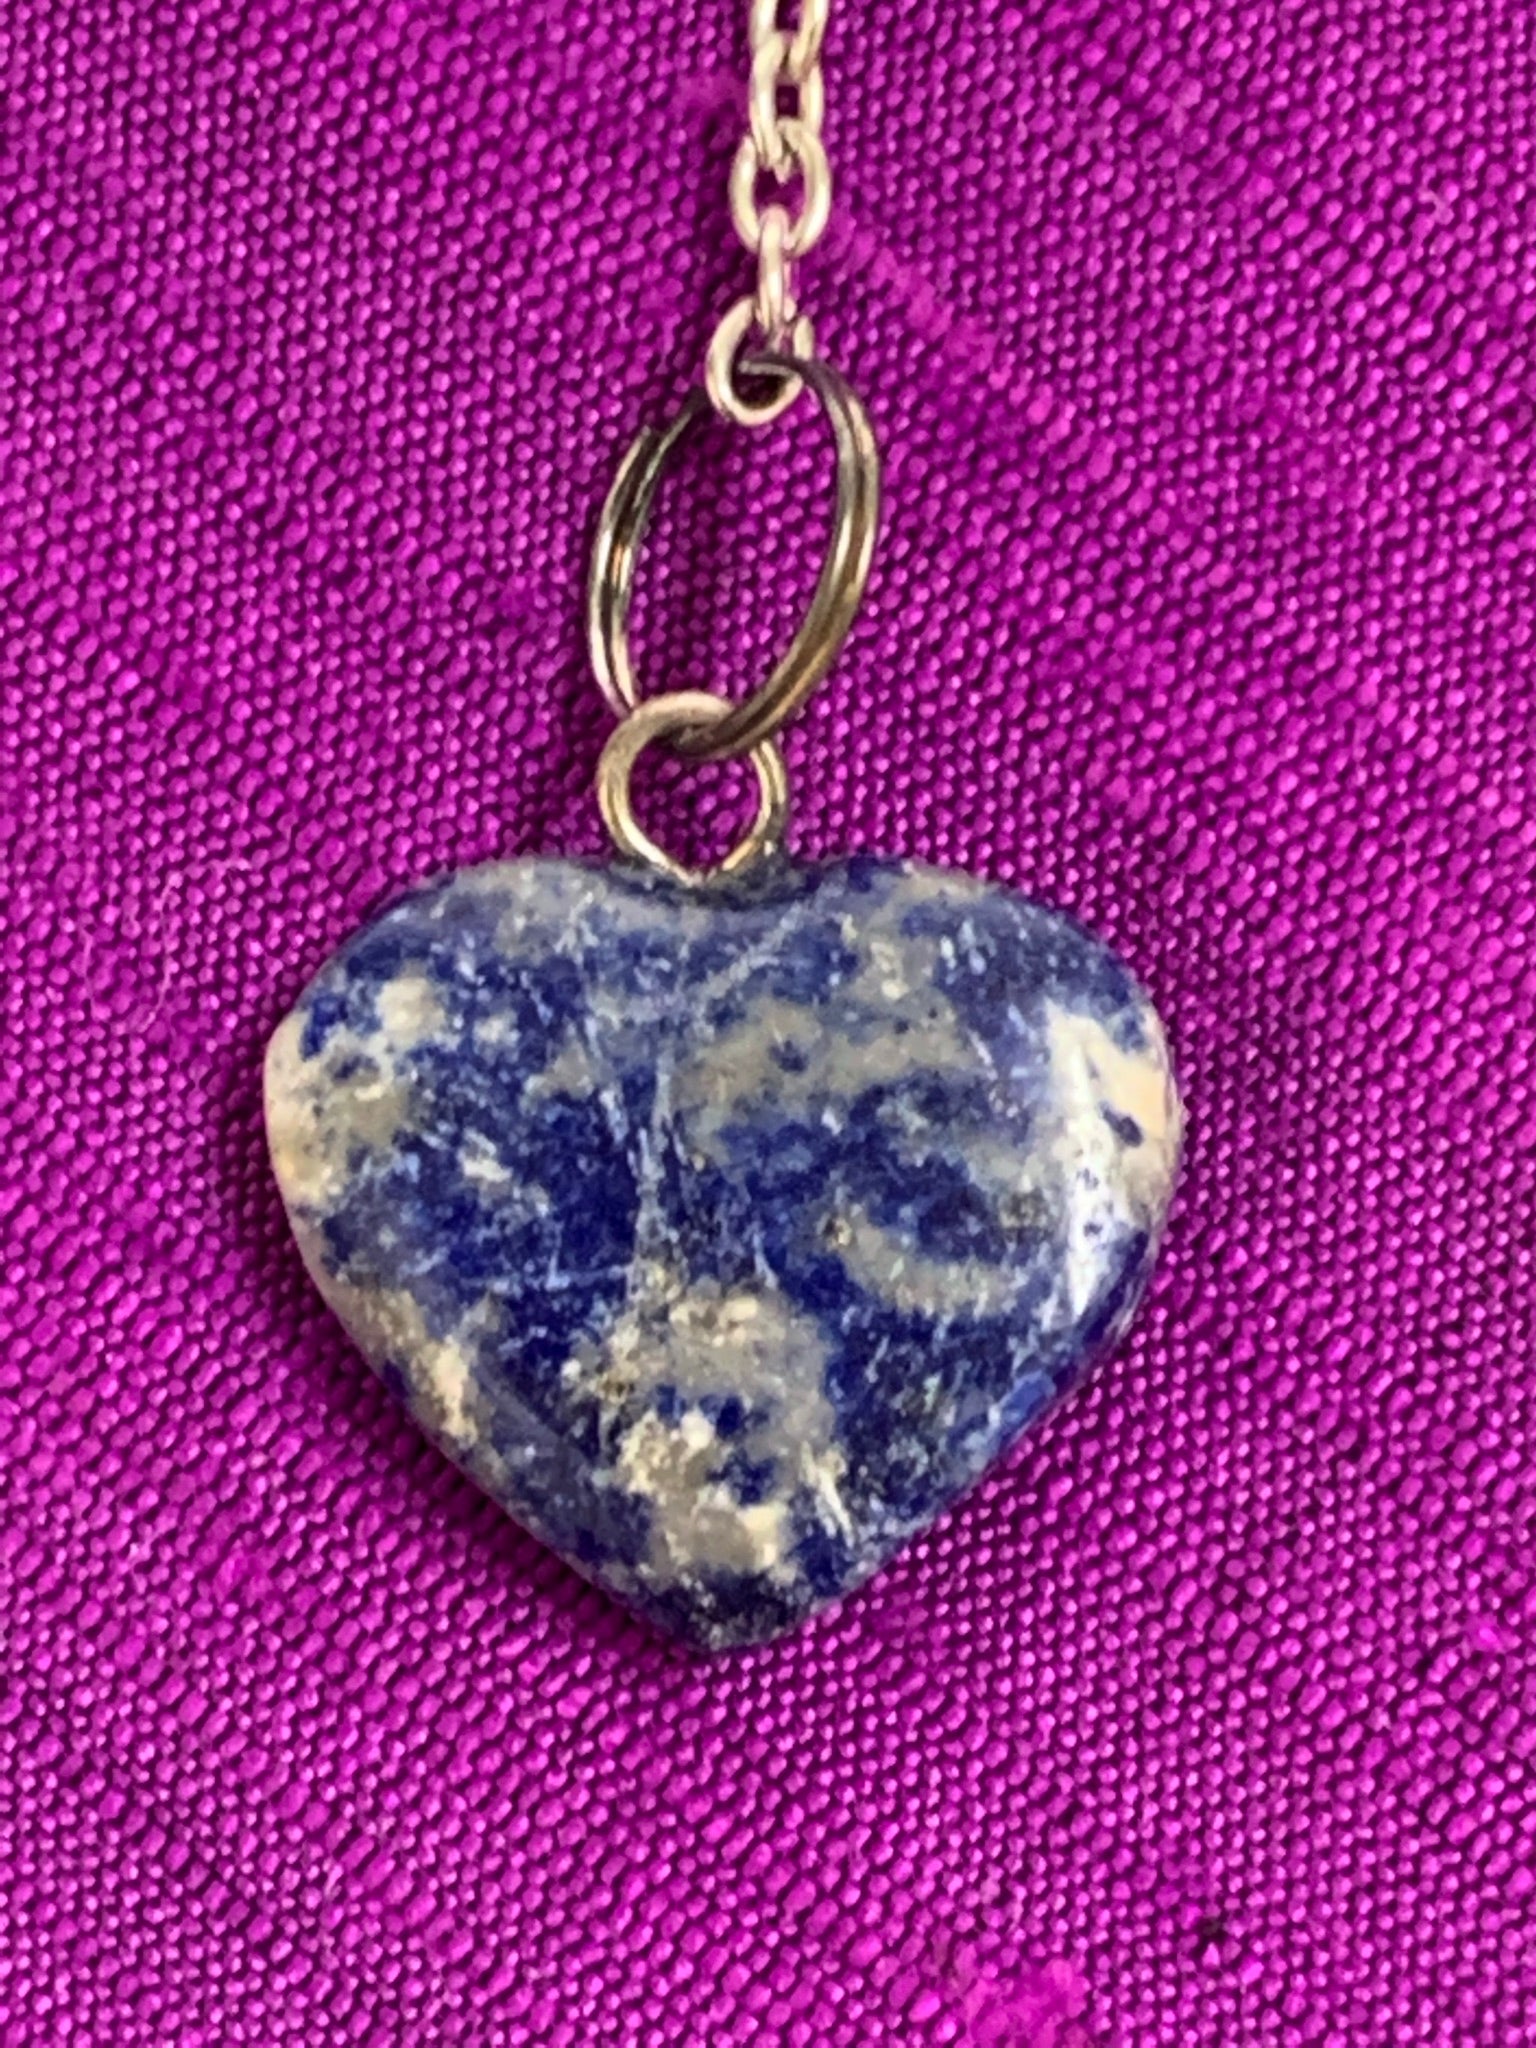 Close up view of the lapis heart at the end of the pendulum's chain.